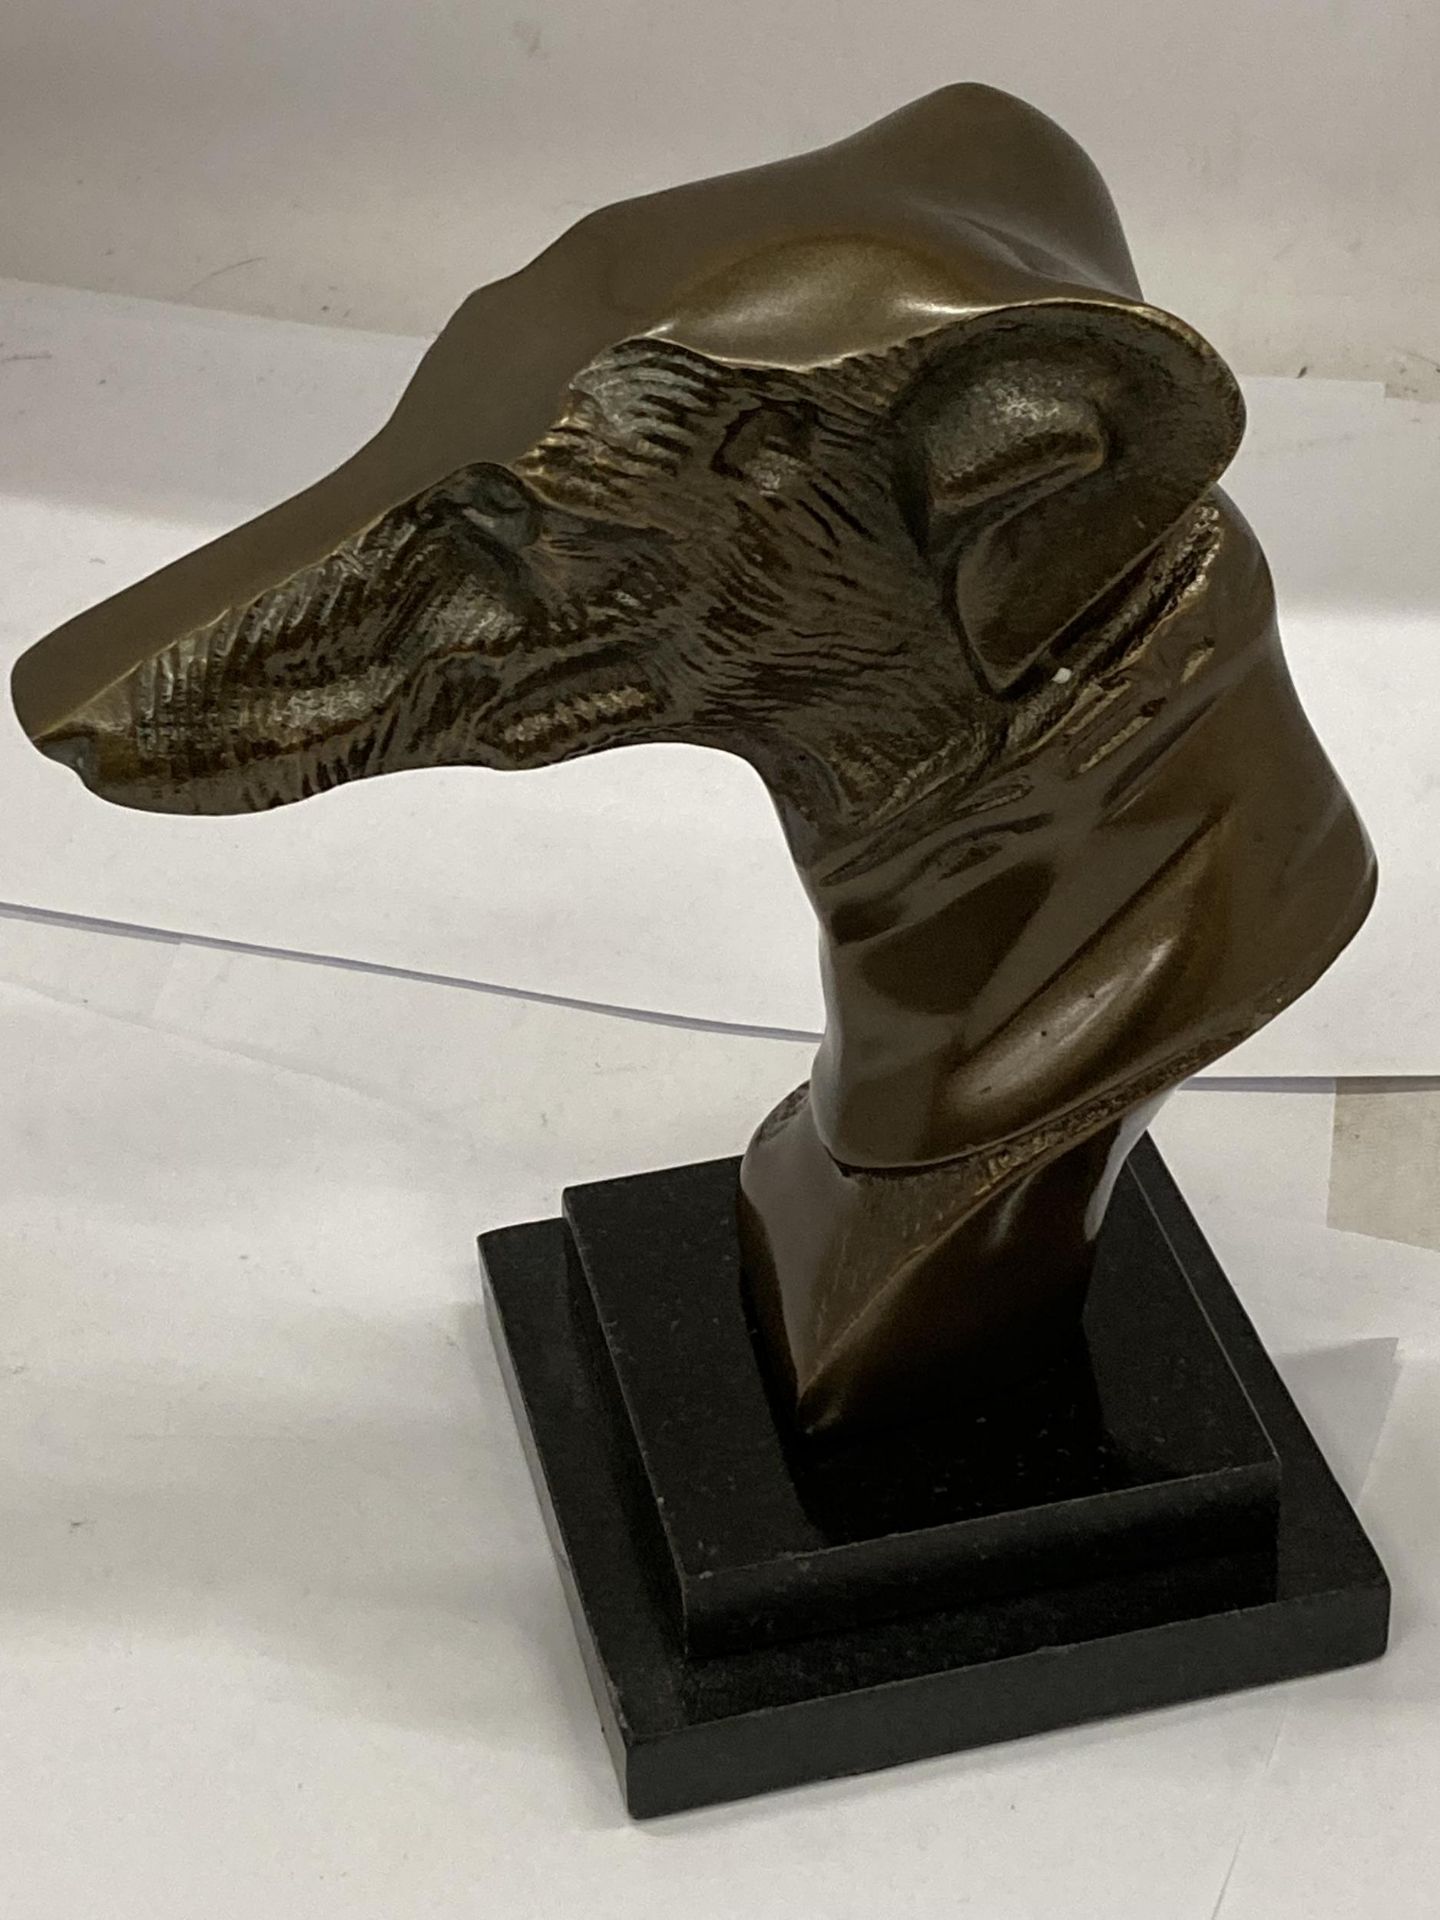 A BRONZE GREYHOUND/WHIPPET DOG BUST ON MARBLE BASE, HEIGHT 22CM